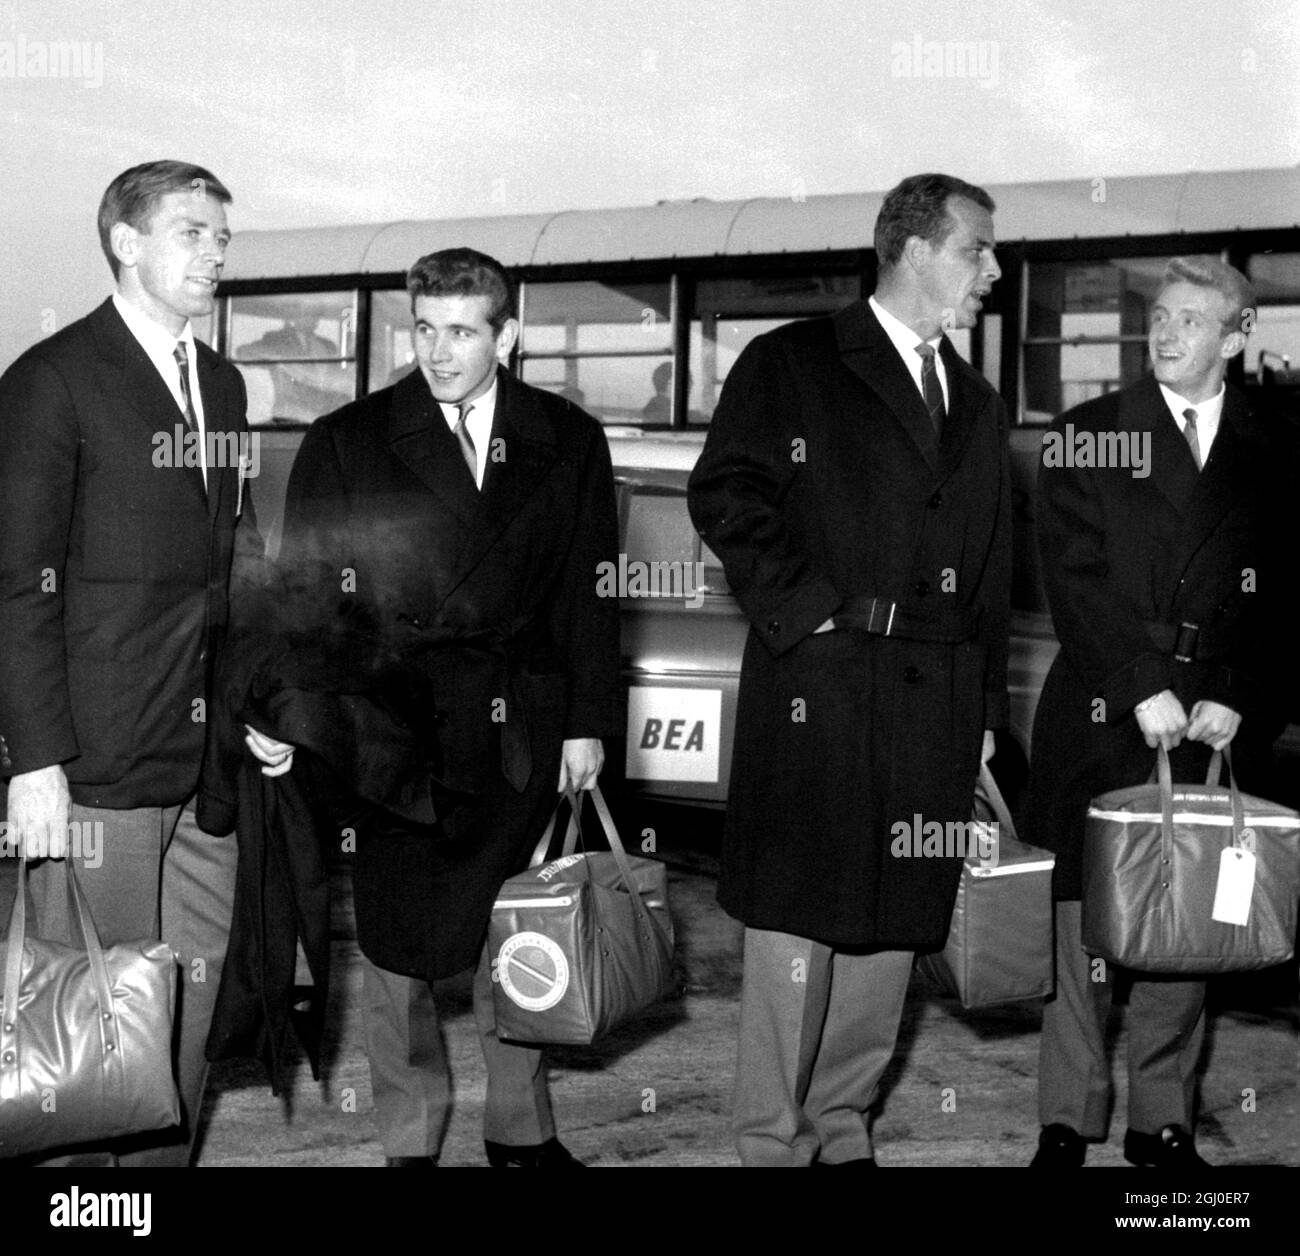 The Italian Football League Team arrived at London Airport on their way to meet the Scottish League team in Glasgow. Four members of the Italian team are British. They are, Left to right: Gerry Hitchens, Joe Baker, John Charles and Denis Law. 30th October 1961. Stock Photo